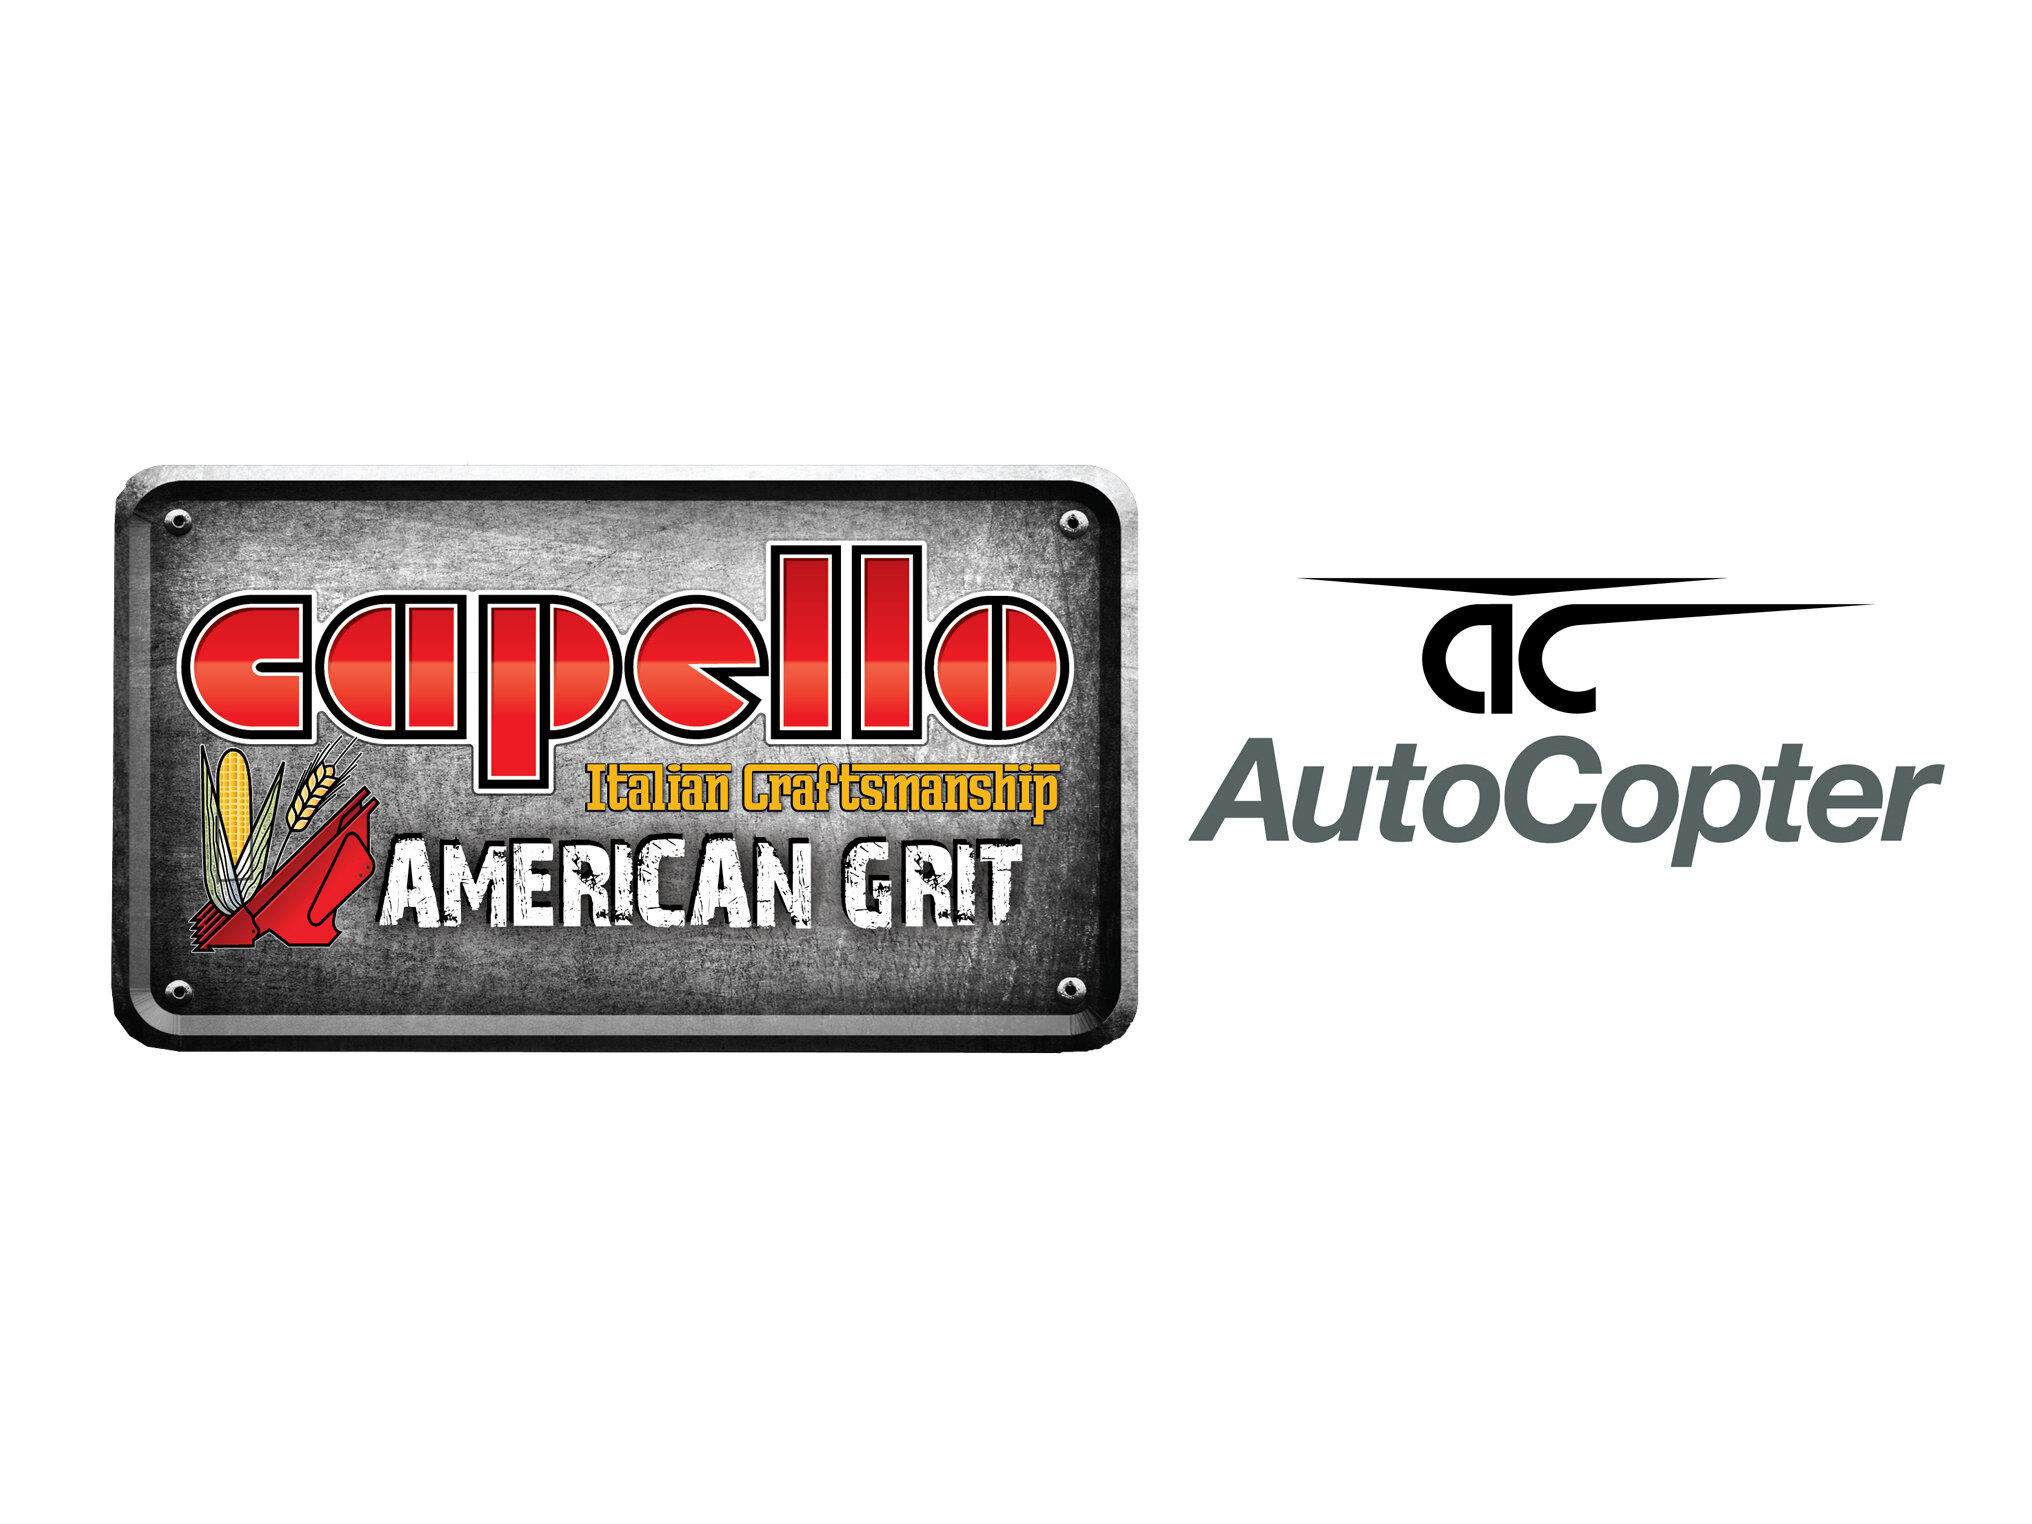 Capello USA and AutoCopter Combined 2015.jpg